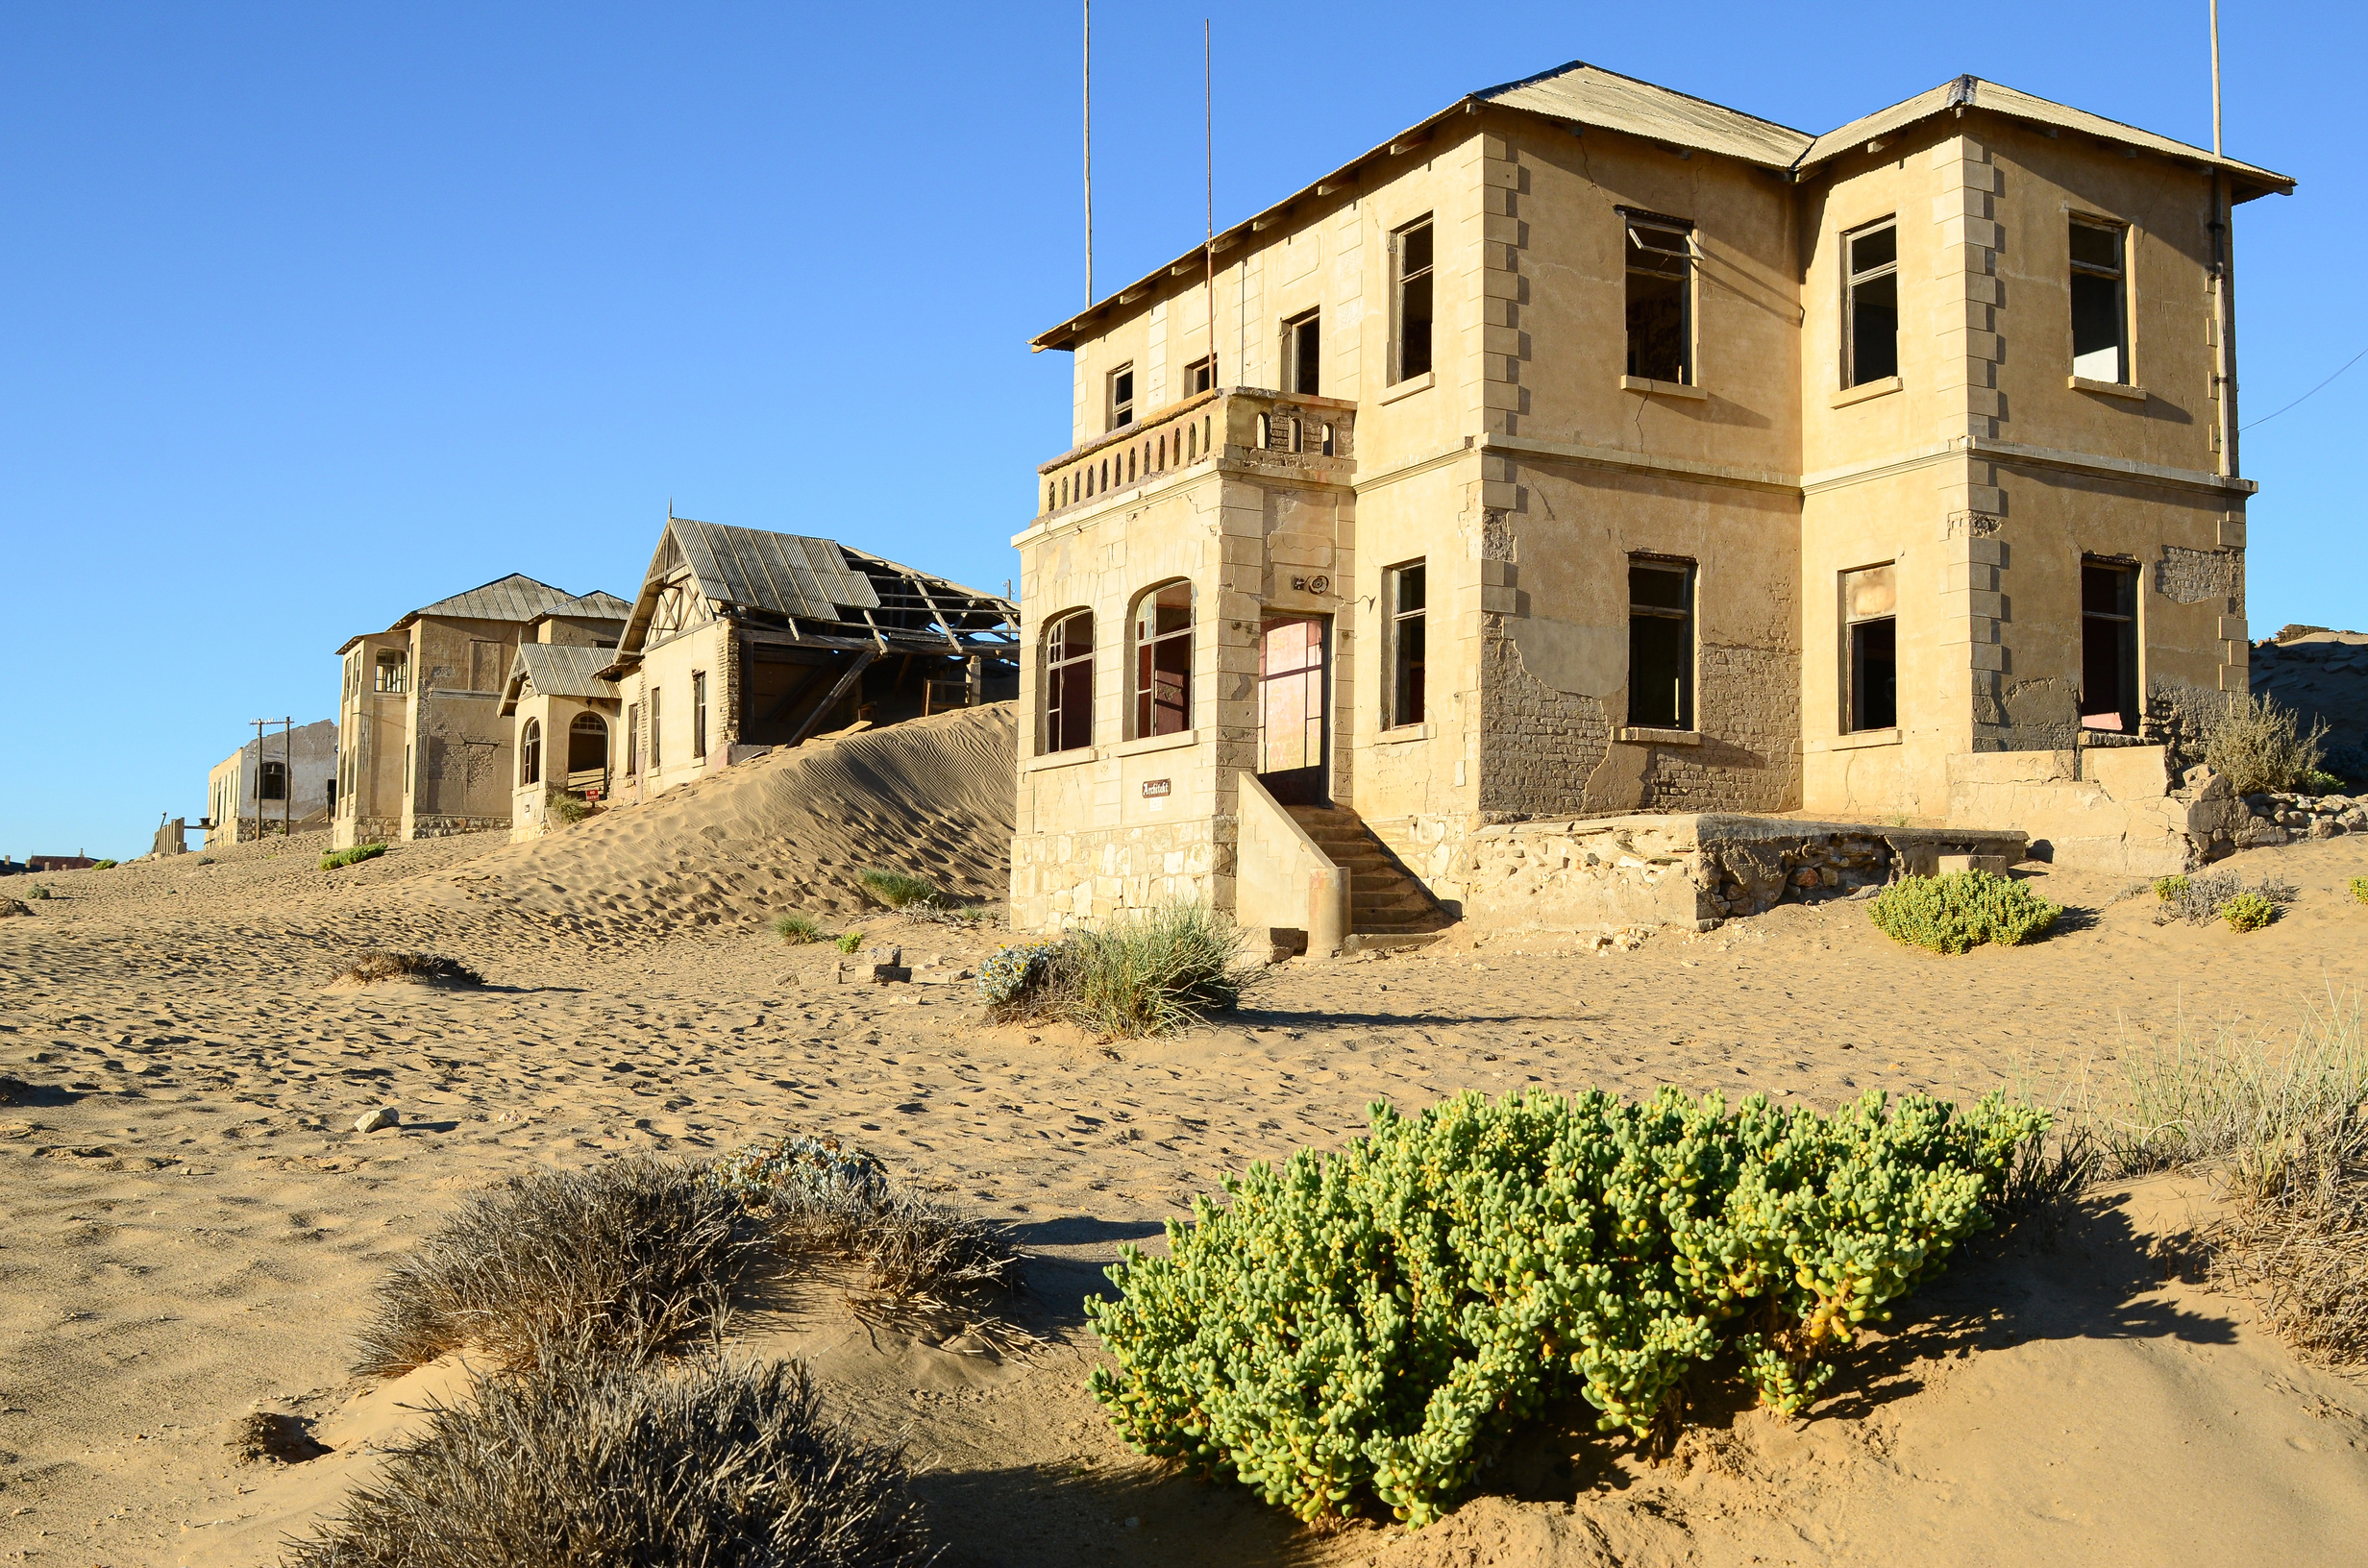 "Portraits of Time" Fine Art Photography Collection. Kolmanskop, Namibia. A work from the collection created at Kolmanskop by photographer, Lizane Louw. An image of an abandoned building in the diamond mining village in the Namib.